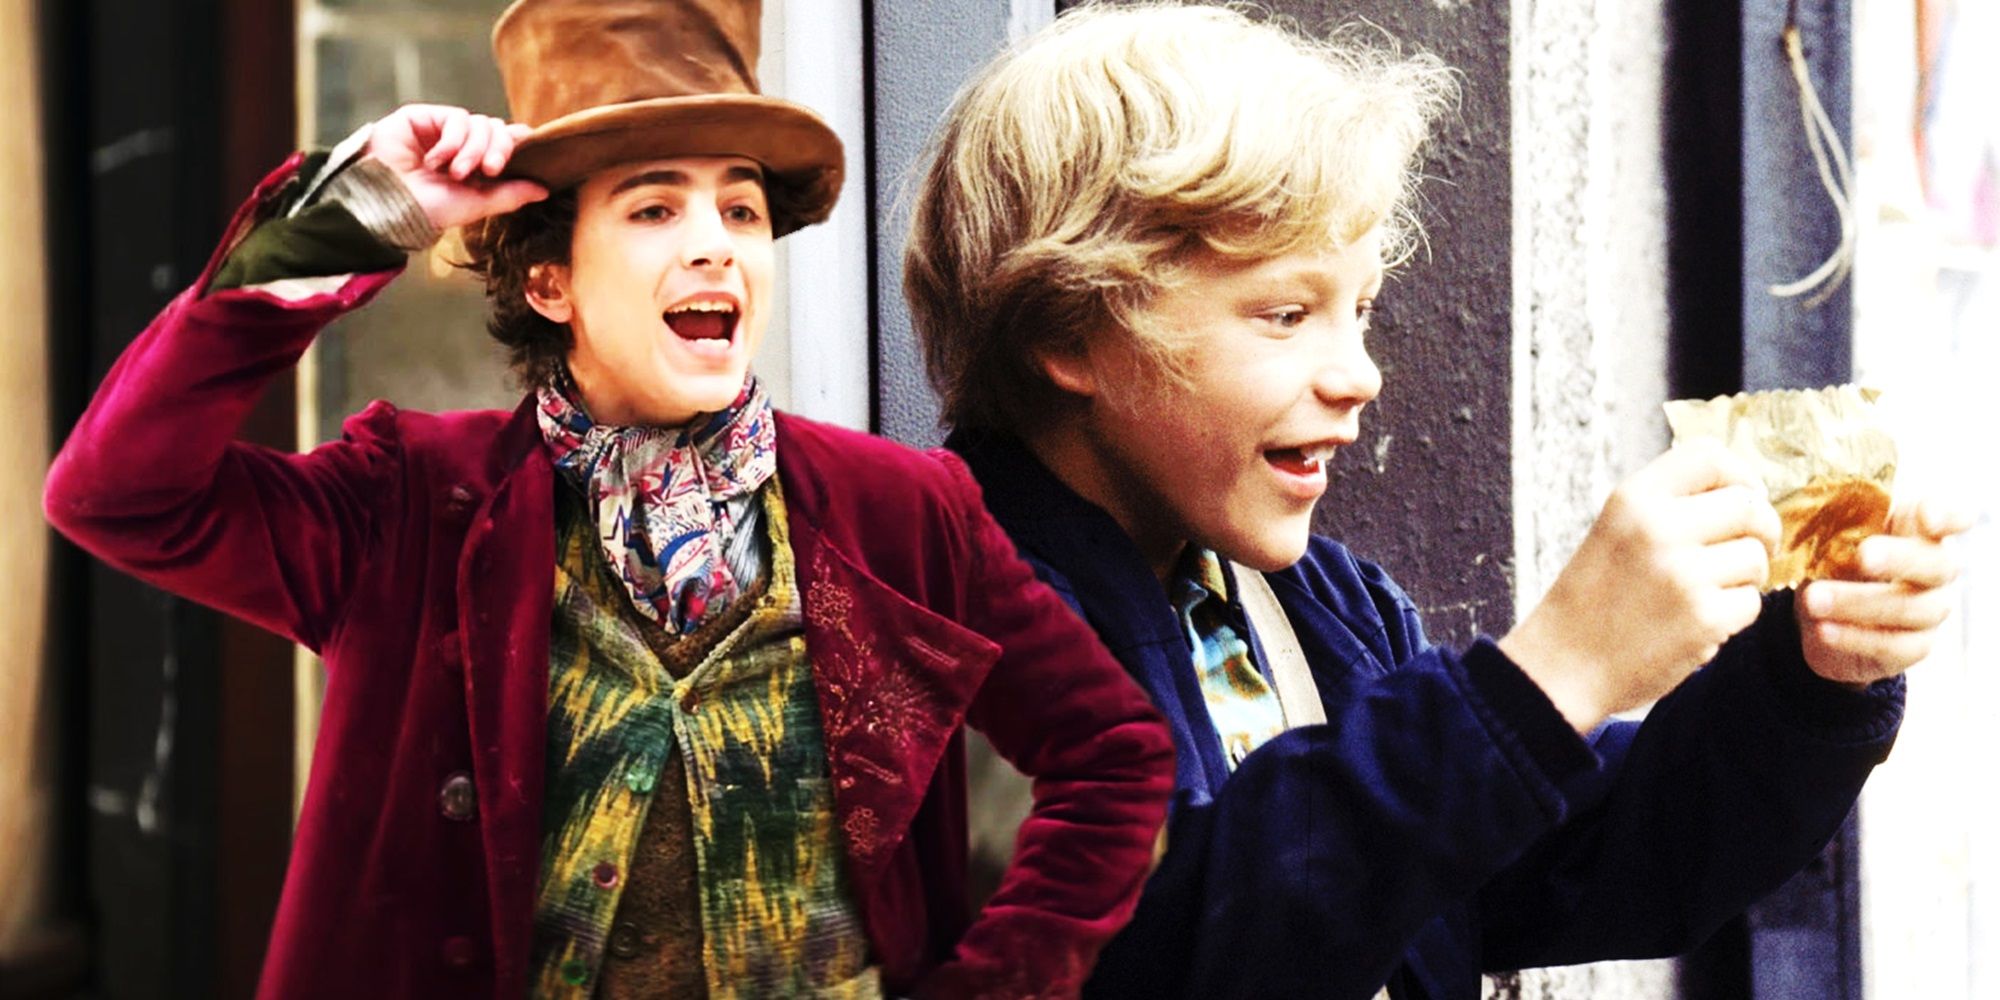 Collage of Willy Wonka in Wonka and Charlie in Willy Wonka and the Chocolate Factory